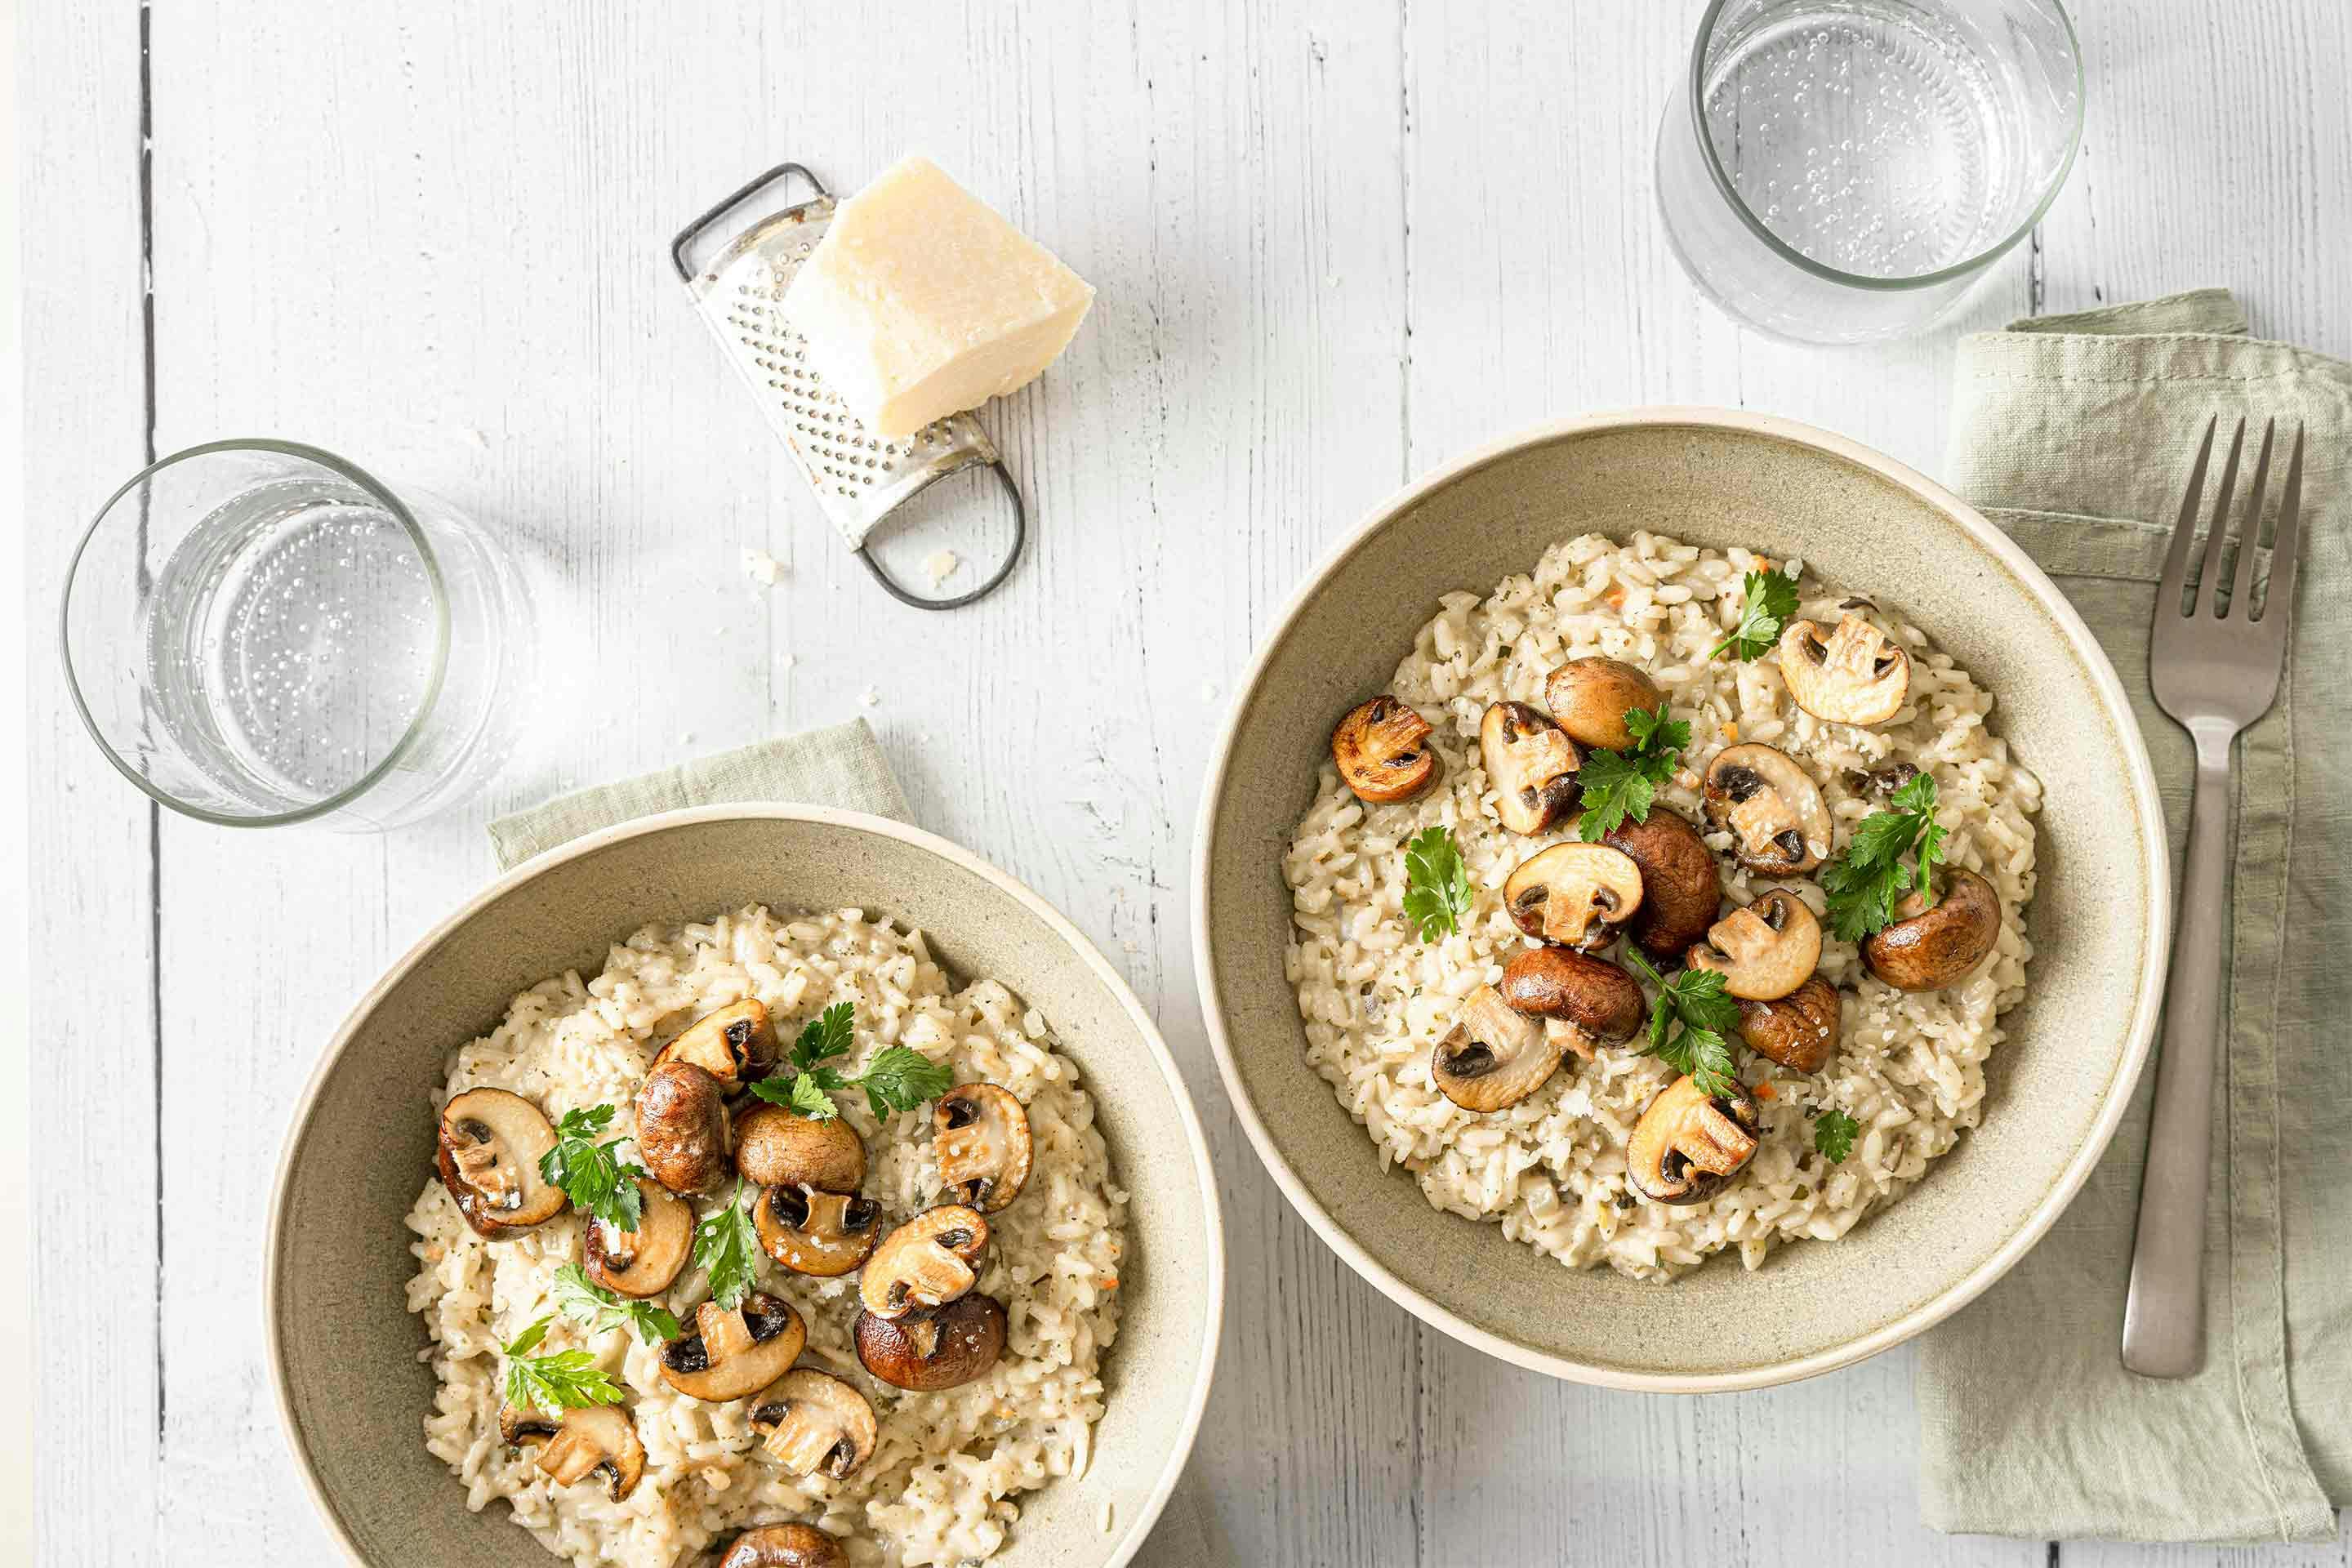 Two bowls of our Quick & Easy mushroom risotto – delicious and done in no time.